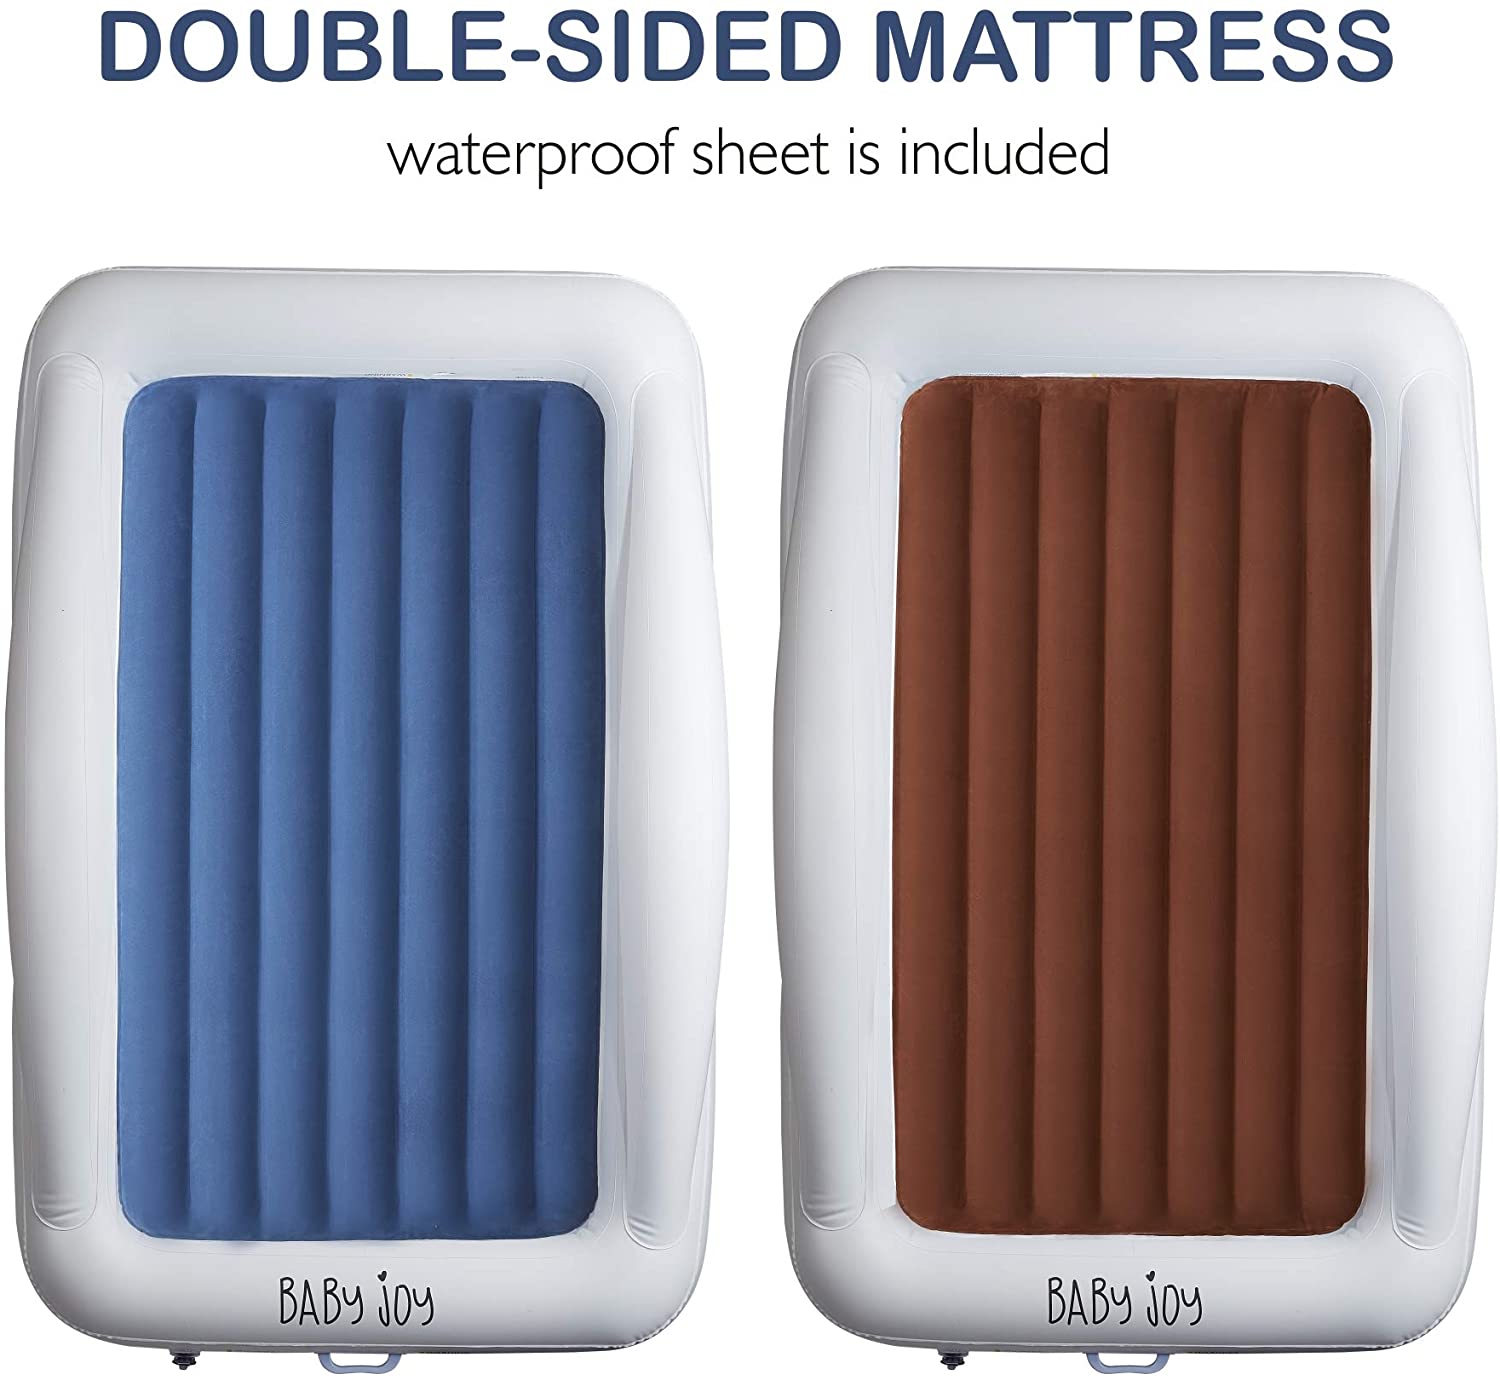 DOUBLE SIDED Inflatable Toddler Bed with Waterproof Sheet | Removable Mattress Bed Bumpers | Fast Electric Air Pump Inflates in Seconds